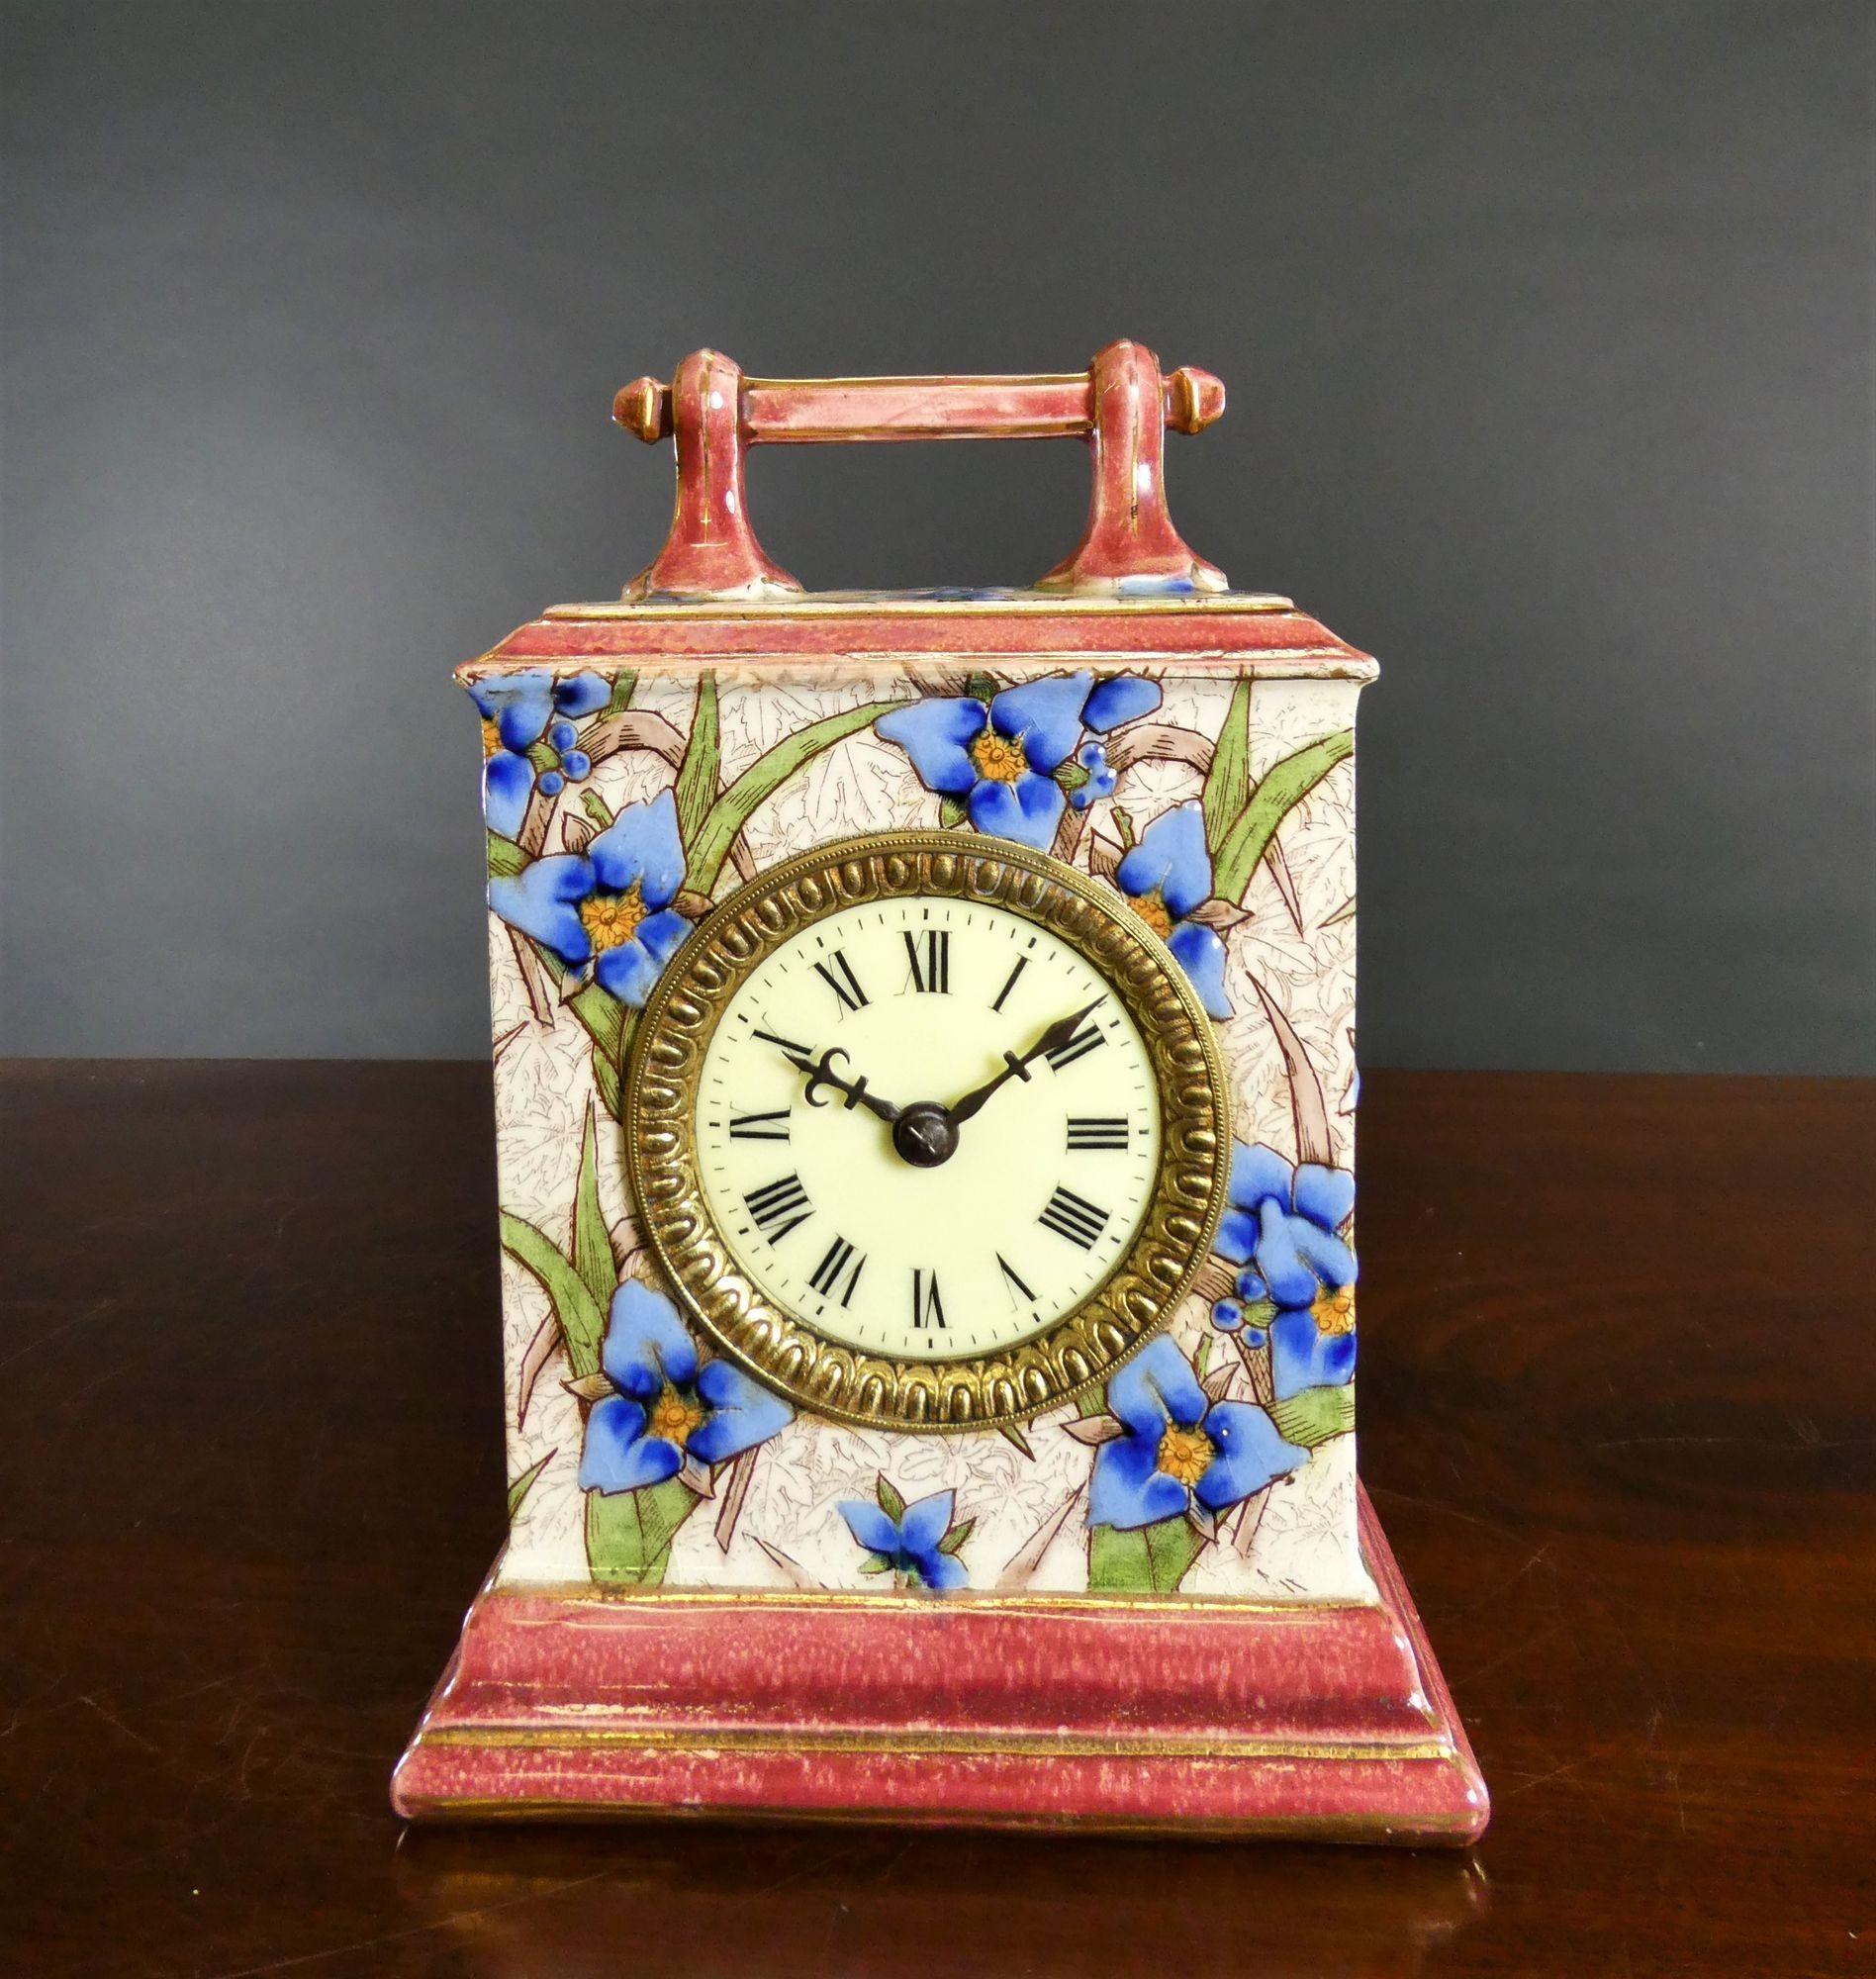 French decorative porcelain mantel clock housed in a square case surmounted by an ornate carrying handle.  Beautifully decorated to all sides with flower applied relief.
Ornate brass bezel, enamel dial with Roman numerals and minute markers and